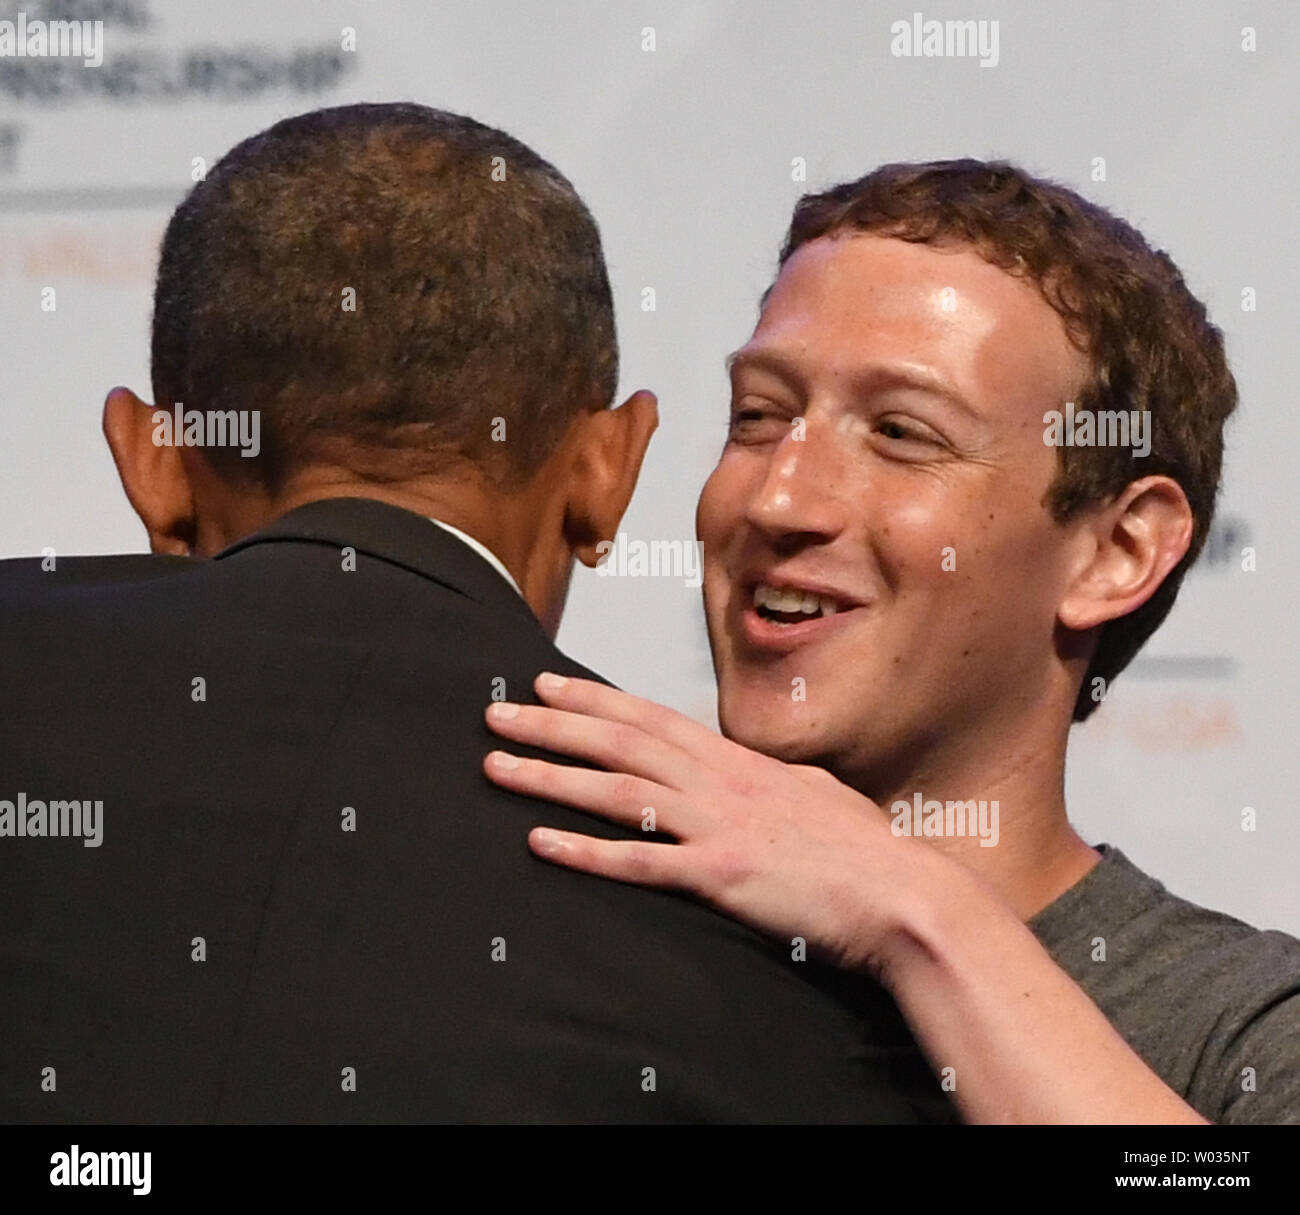 President Barack Obama (L) greets Facebook founder Mark Zuckerberg to a panel discussion at the Global Entrepreneurship Summit 2016 at Stanford University in Palo Alto, California, on June 24, 2016. GES aims to connect American entrepreneurs and investors with international counterparts. Photo by Terry Schmitt/UPI Stock Photo